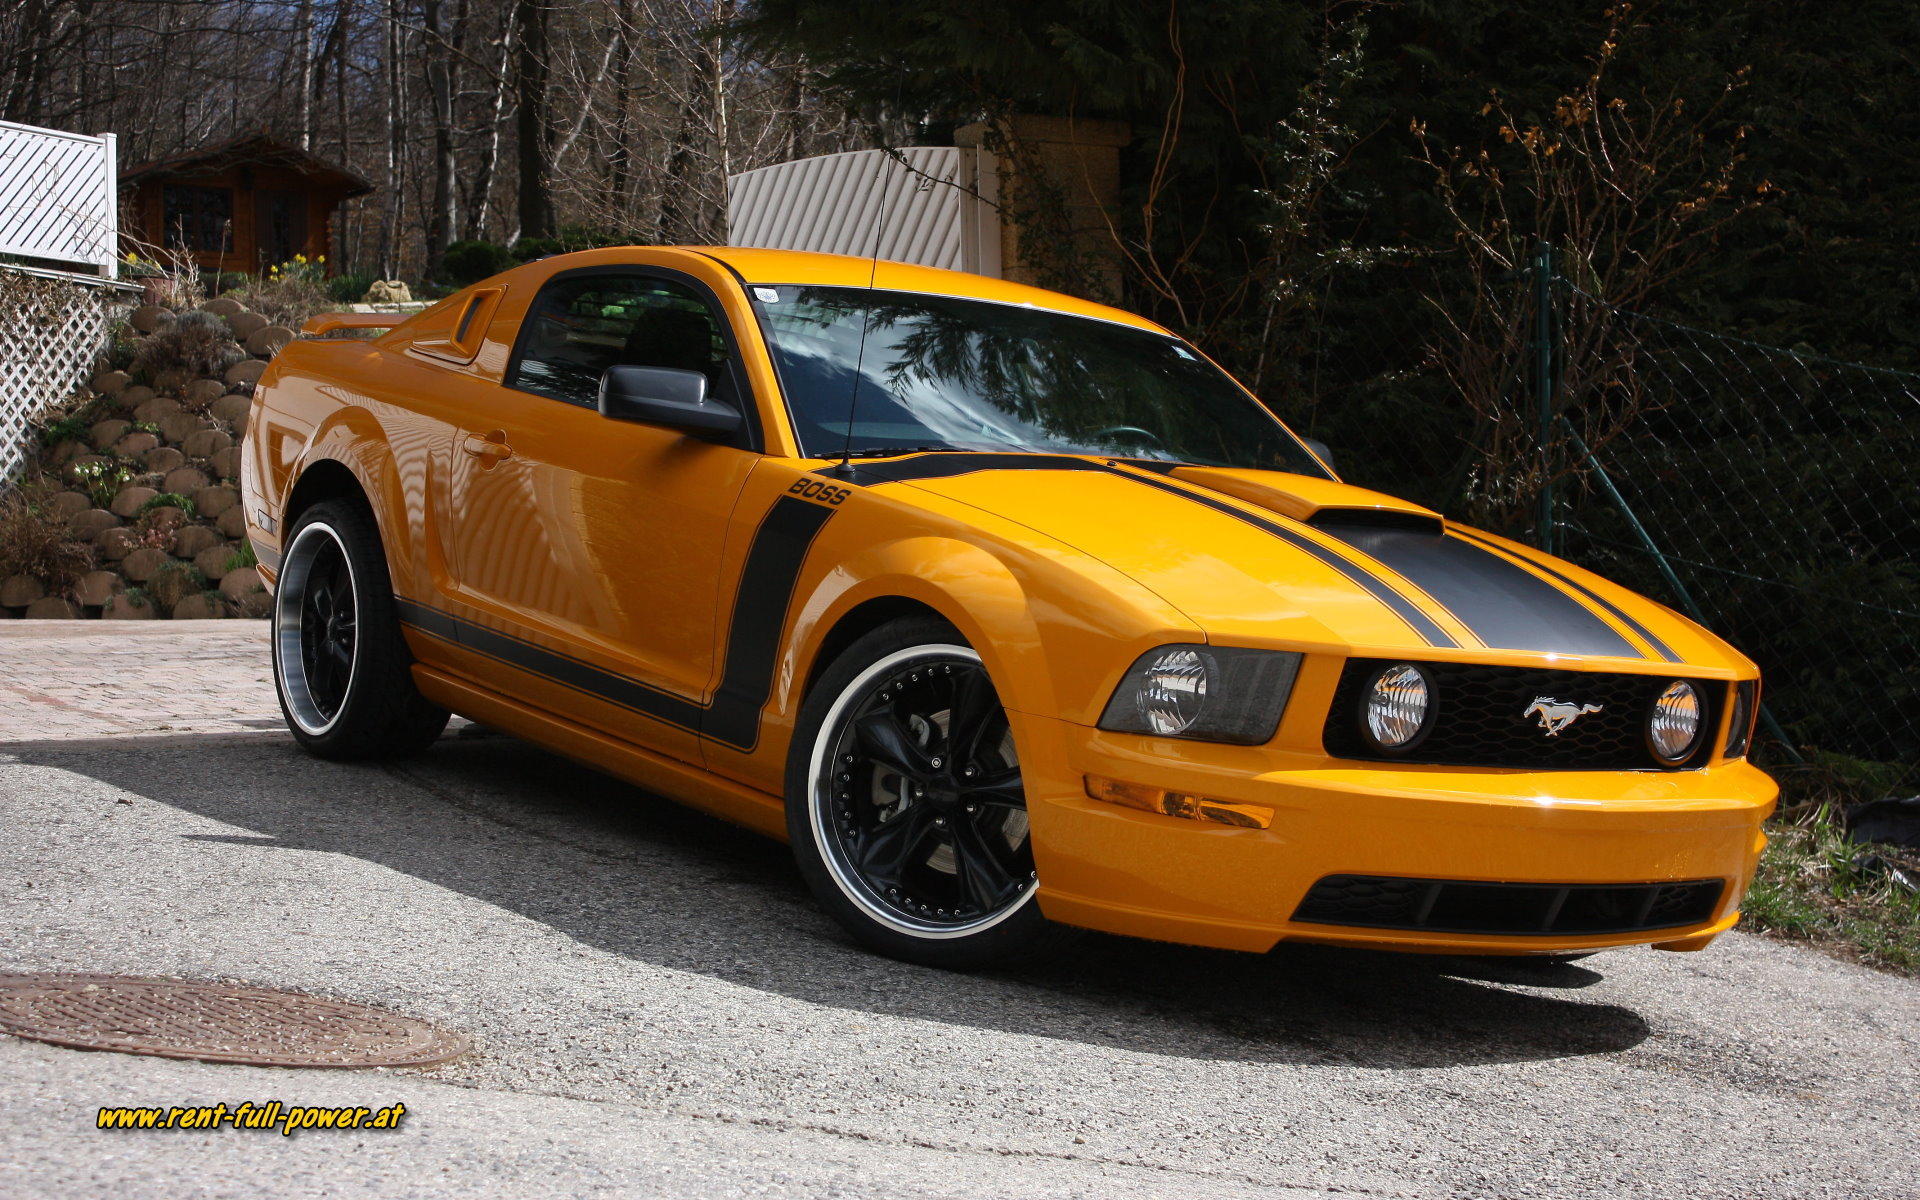 Ford Mustang GT US cars pony car